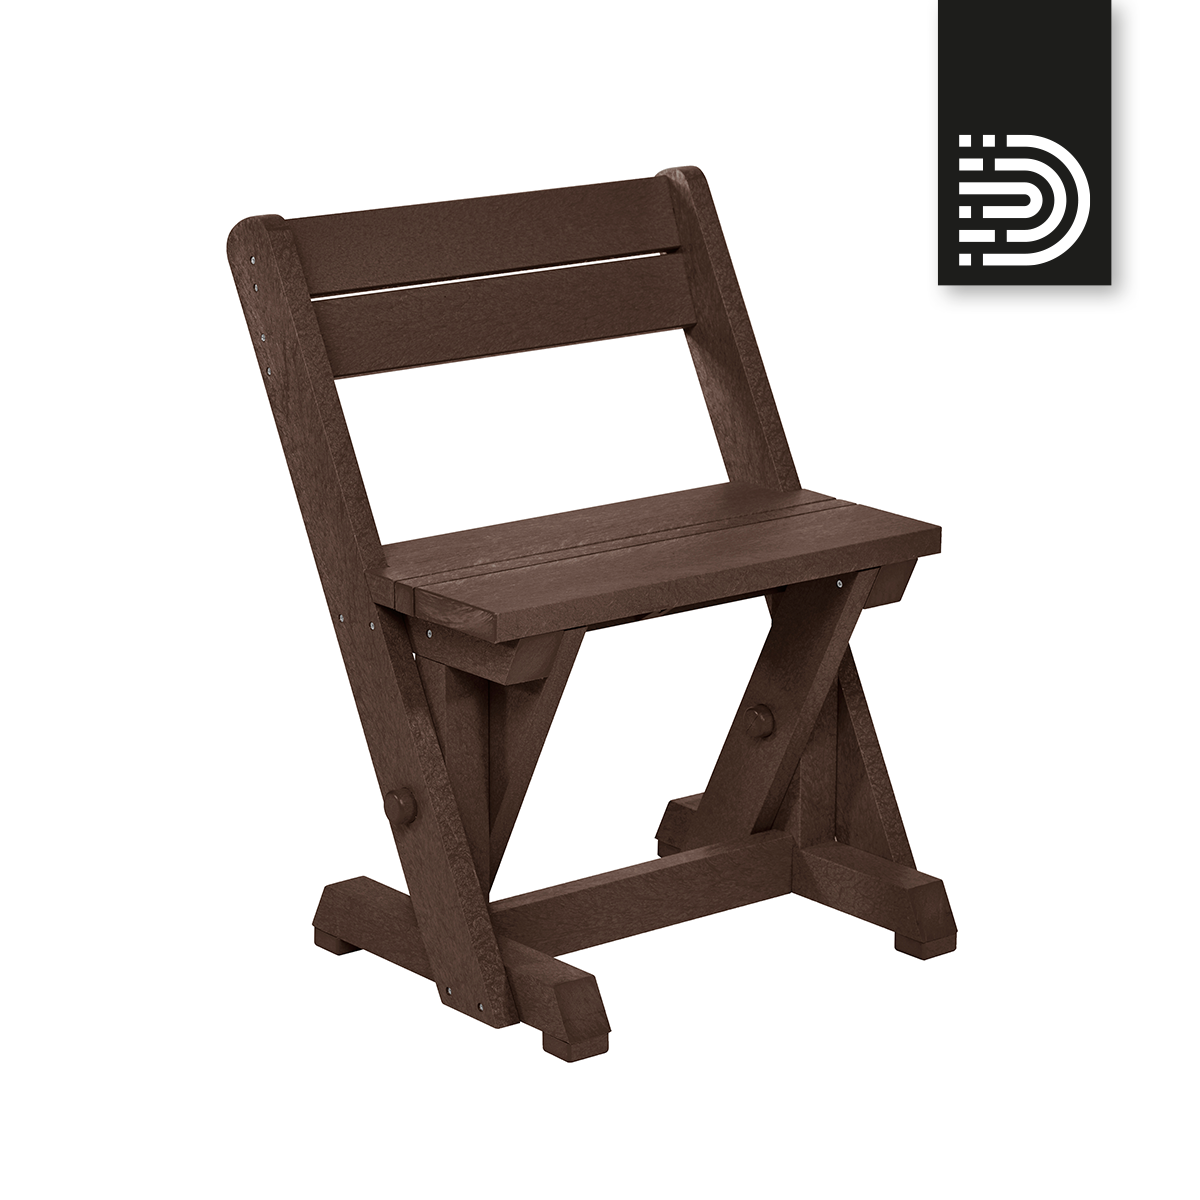 C202 Dining Chair with back - chocolate 16